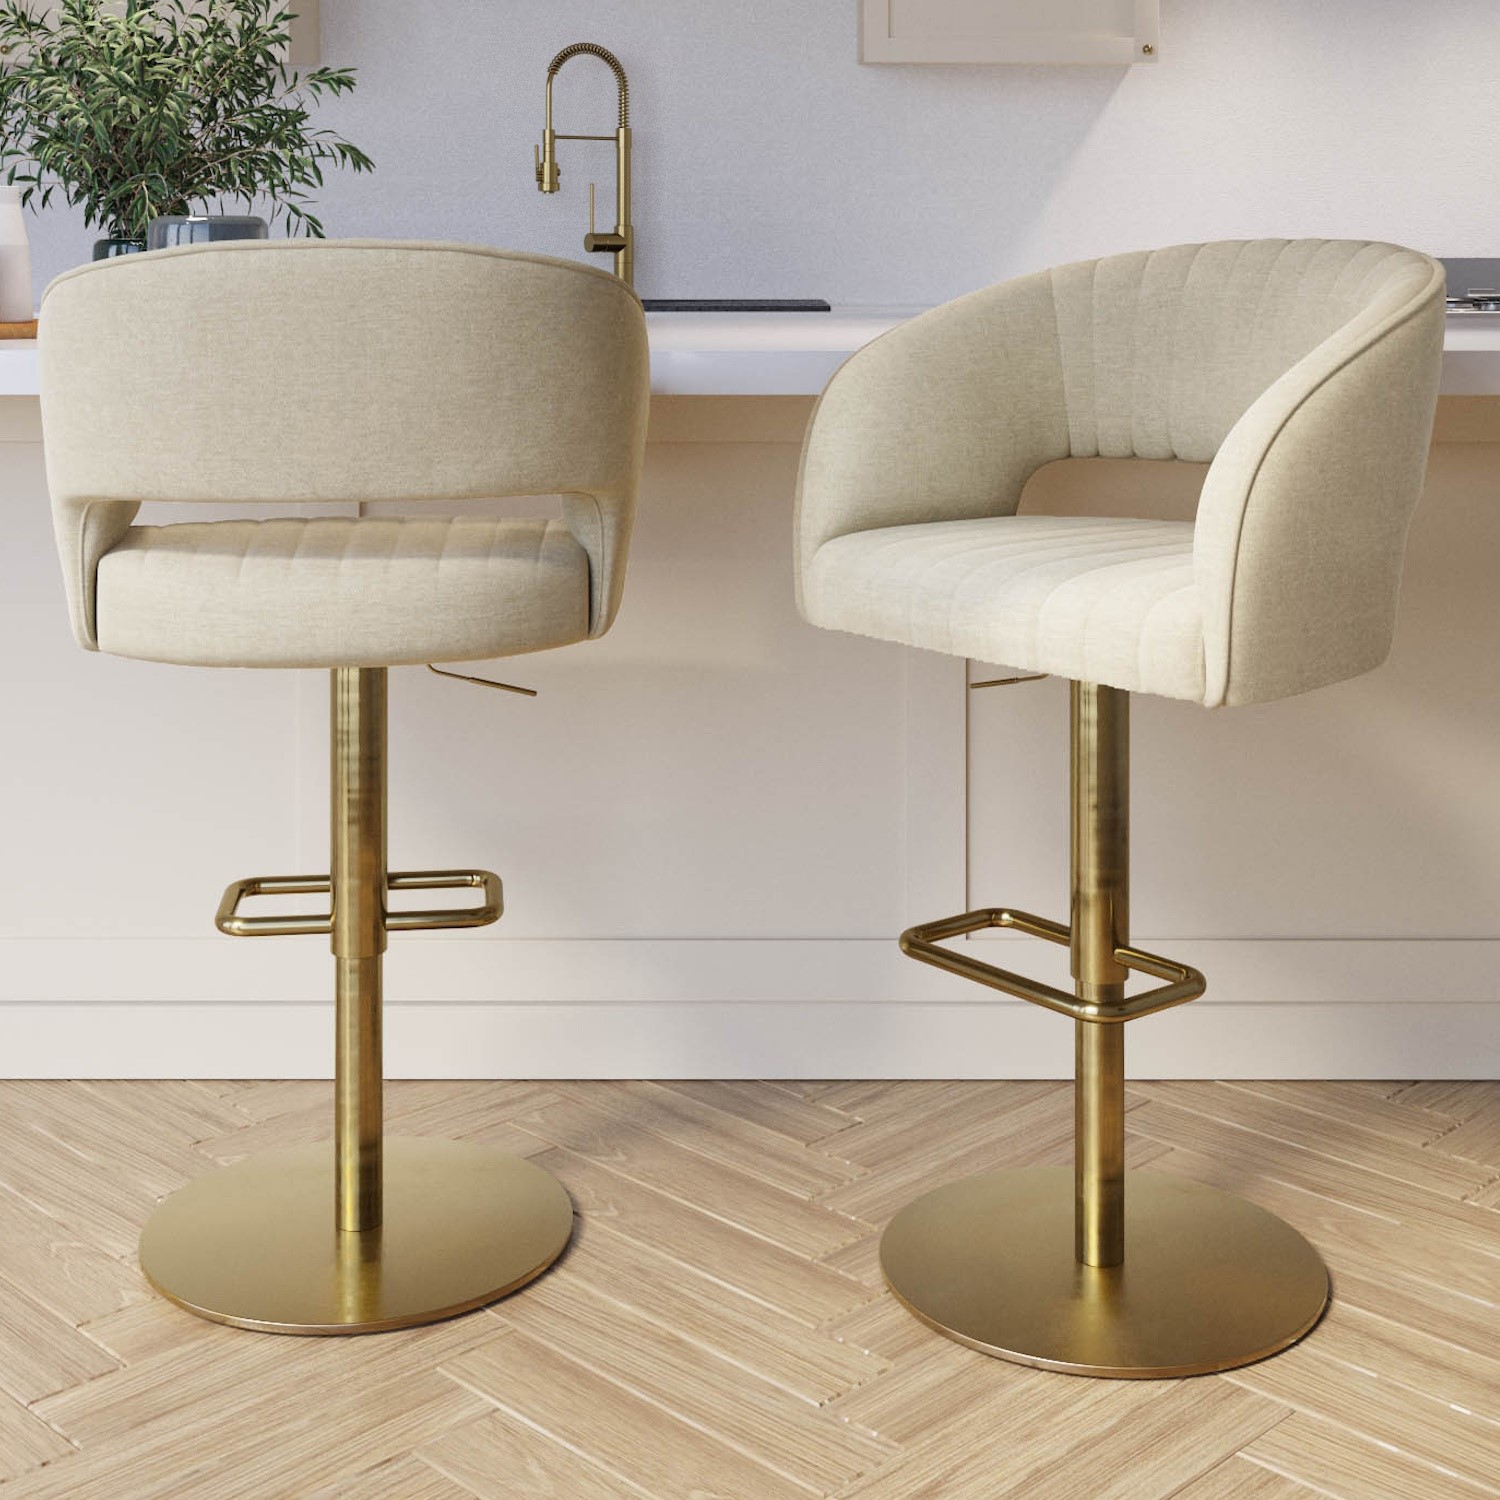 Photo of Set of 2 curved beige fabric adjustable swivel bar stool with gold base - runa